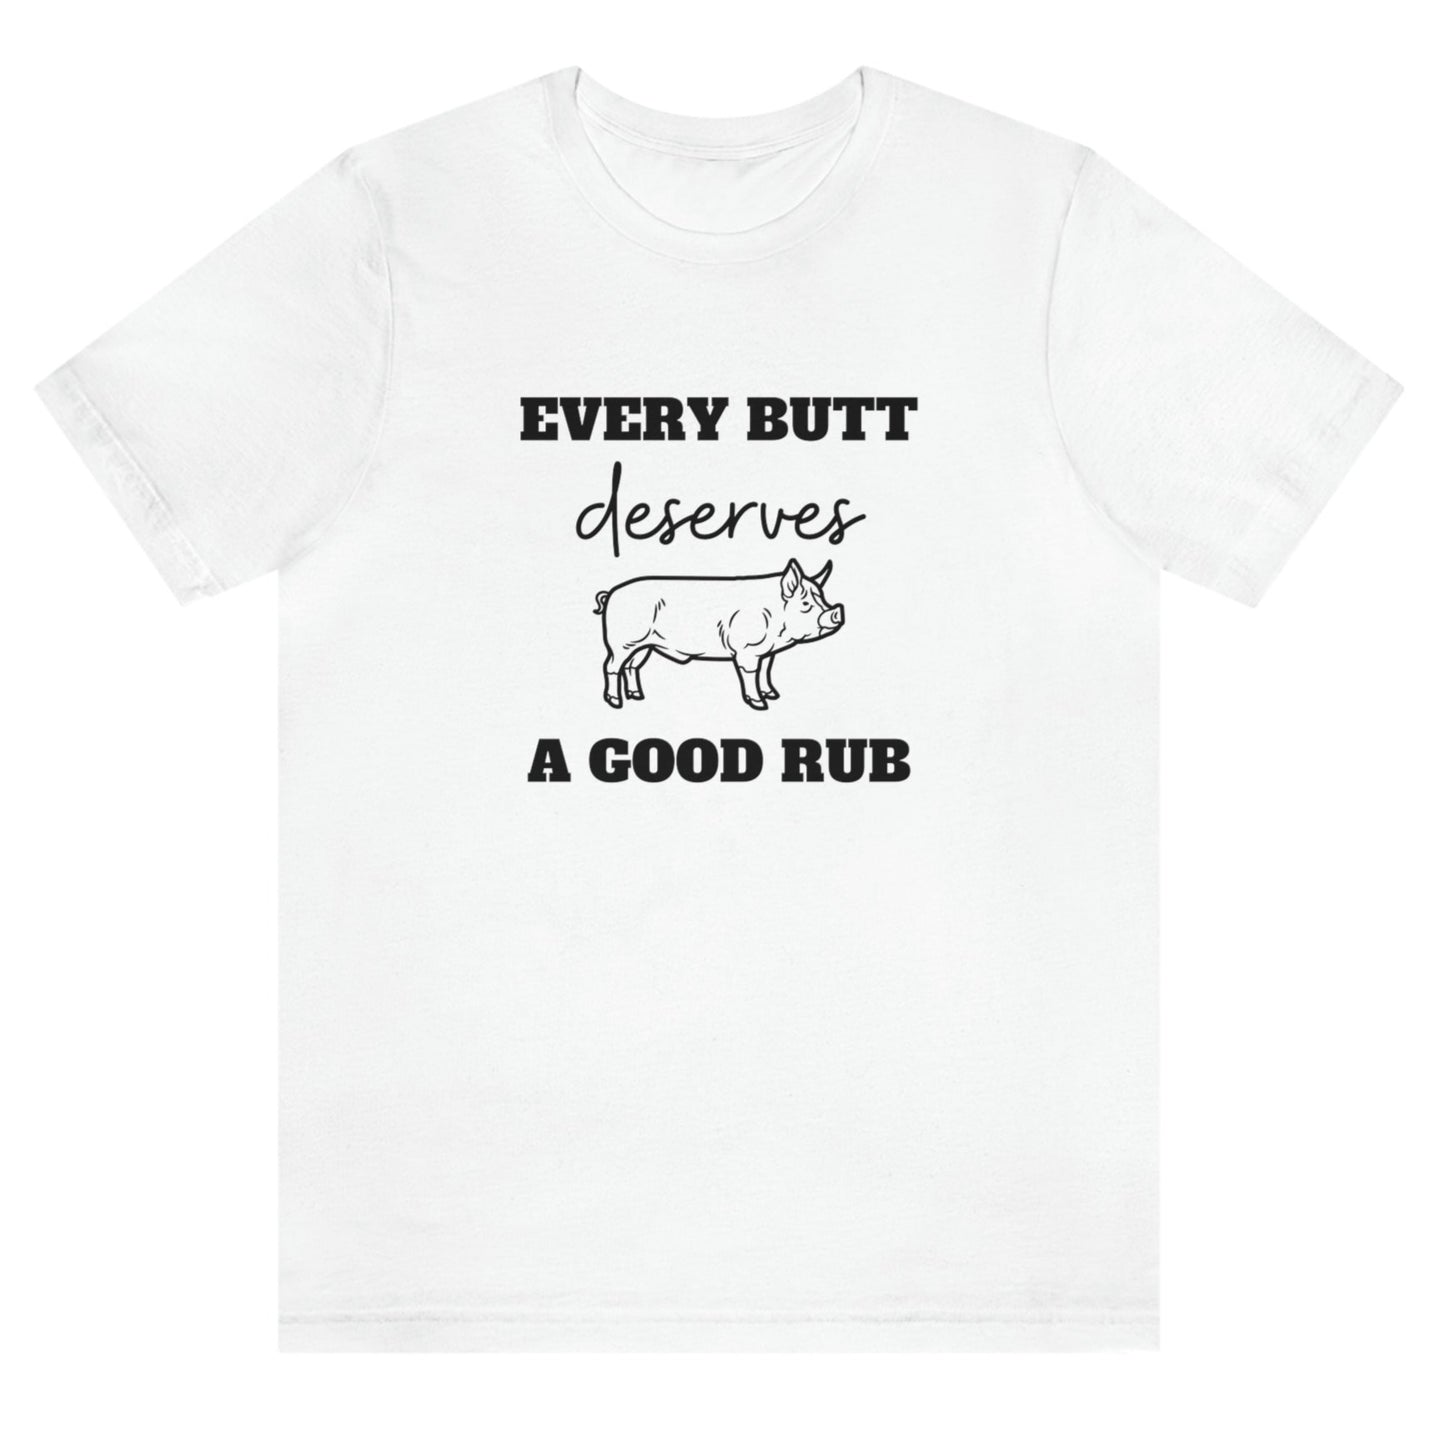 every-butt-deserves-a-good-rub-white-t-shirt-with-pig-graphic-barbeque-cooking-unisex-tee